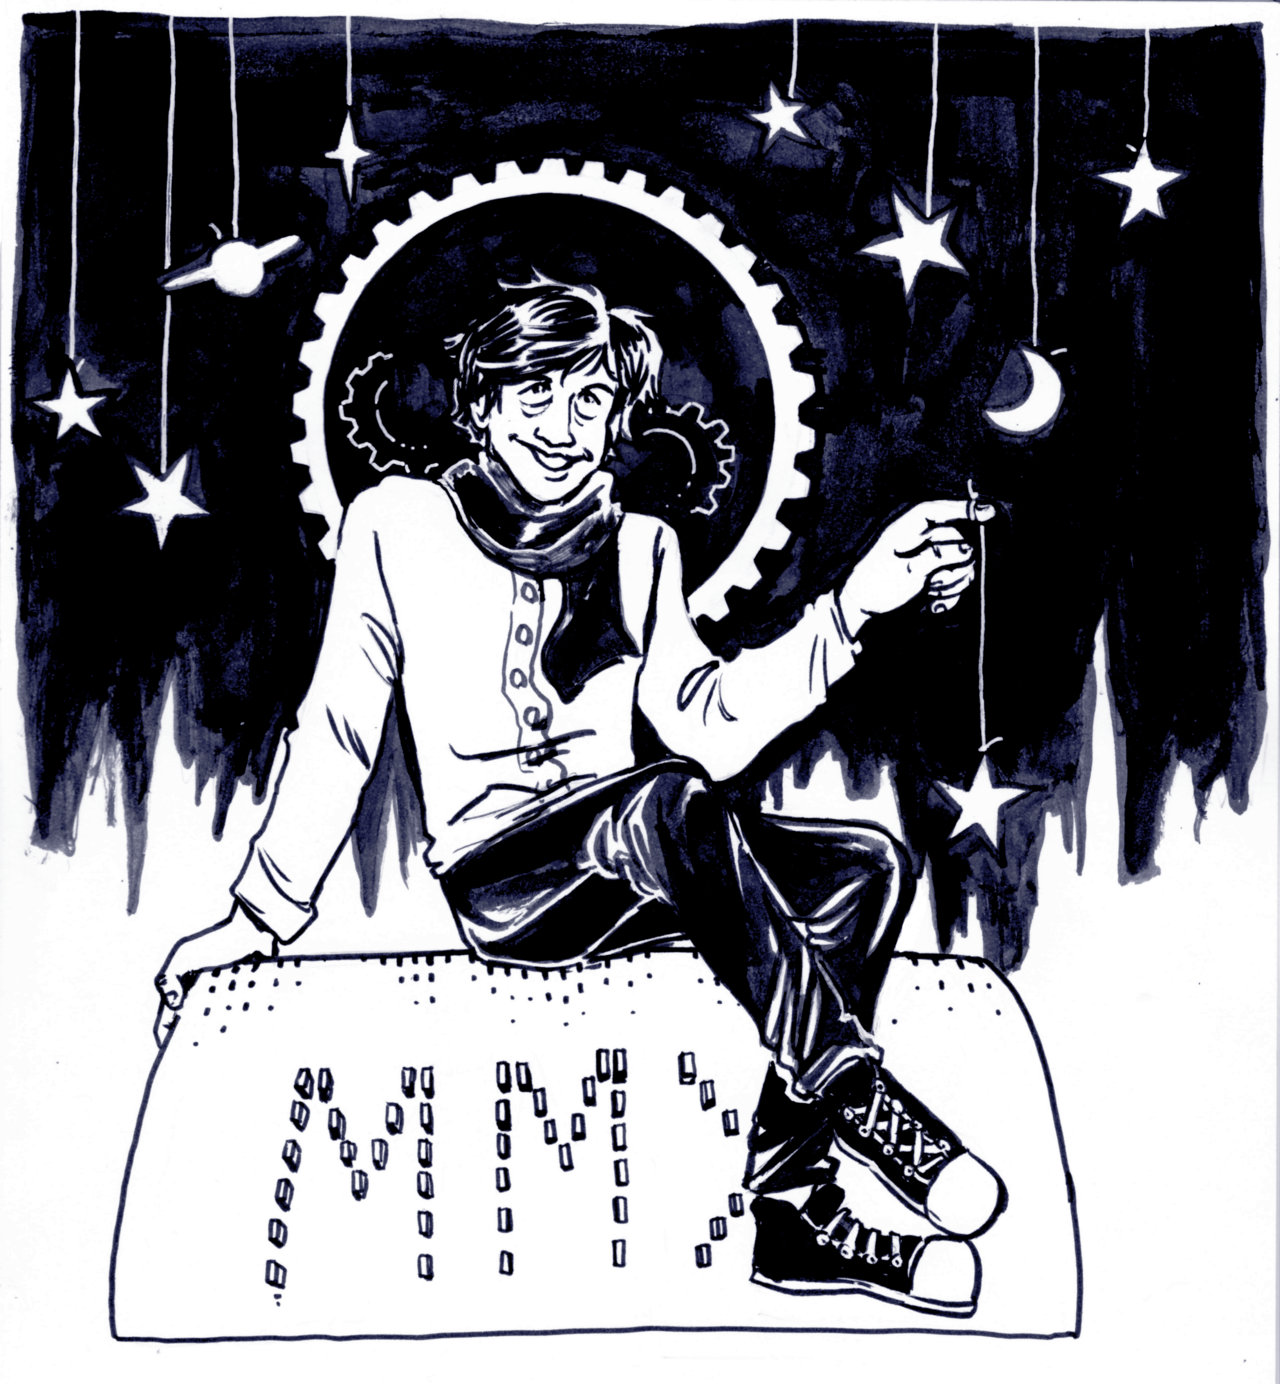 Martin Molin sits on top of a MMX programming plate. Star cutouts hang above him, and one hangs off his finger.